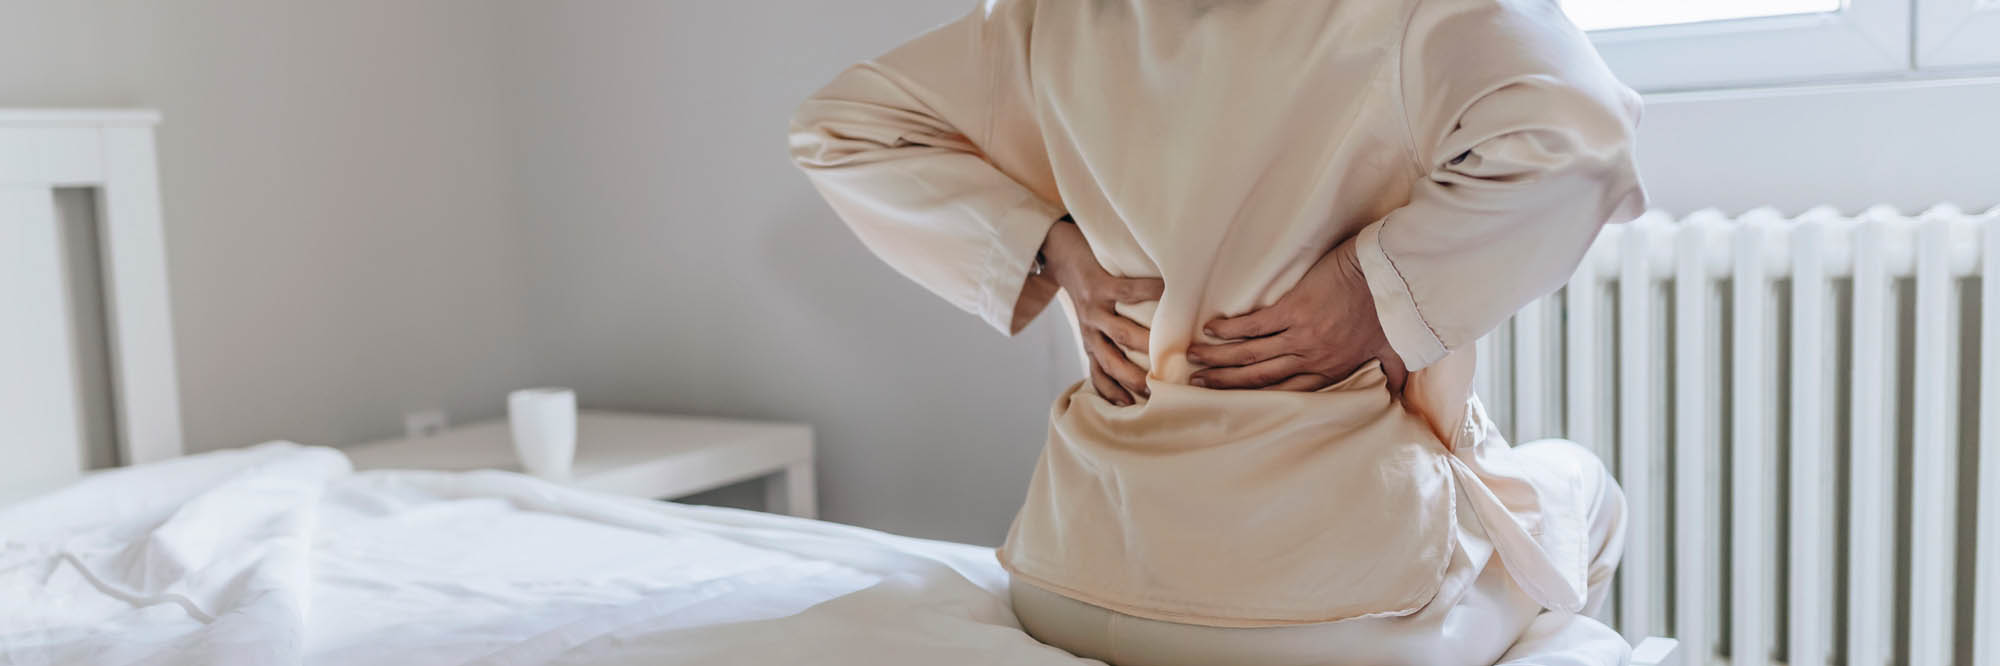 Sciatica signs, reasons and when to get care